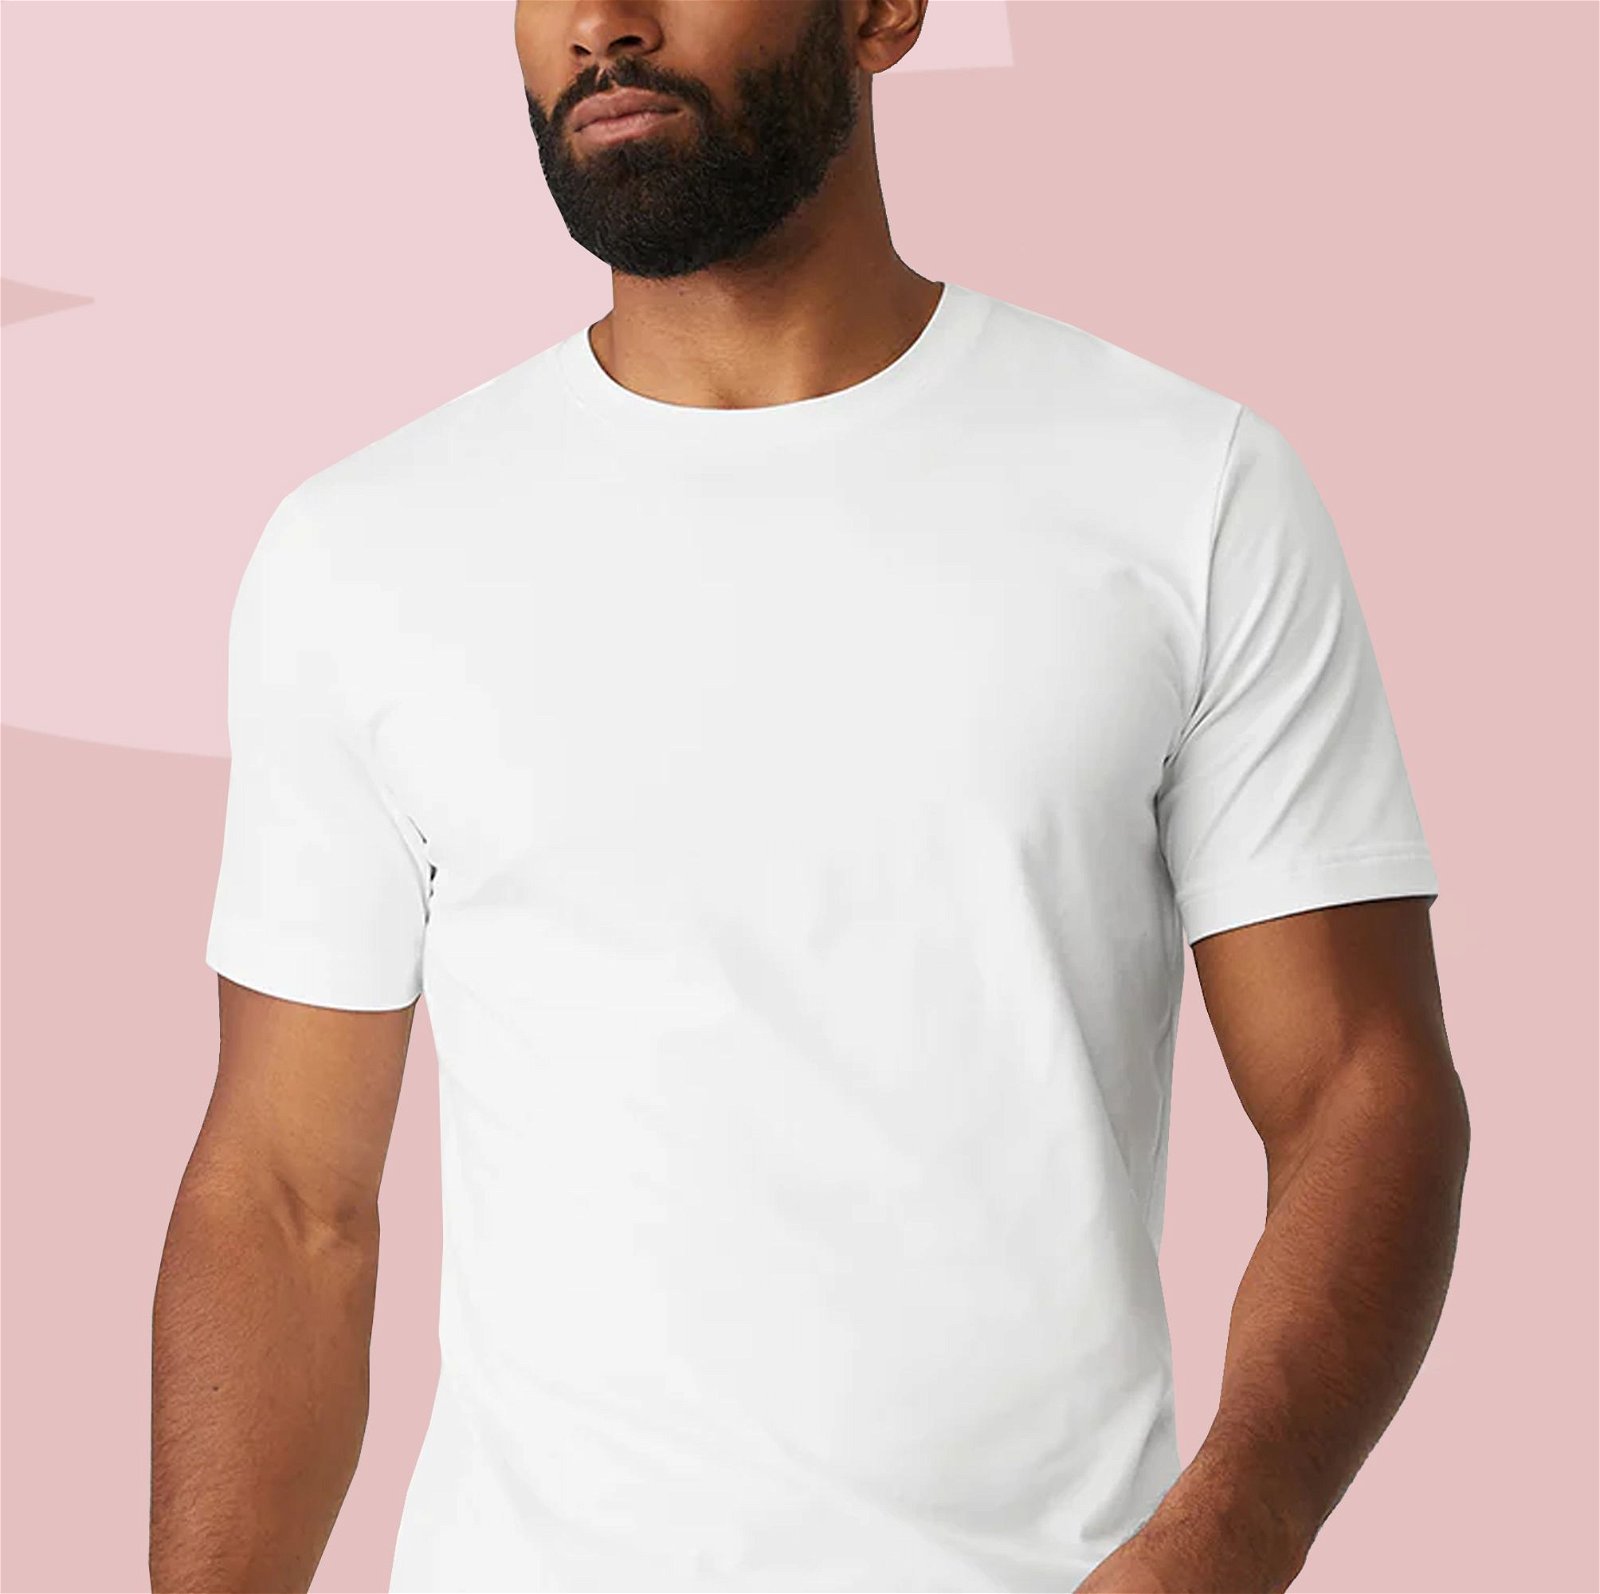 Every White T-Shirt You Could Ever Need